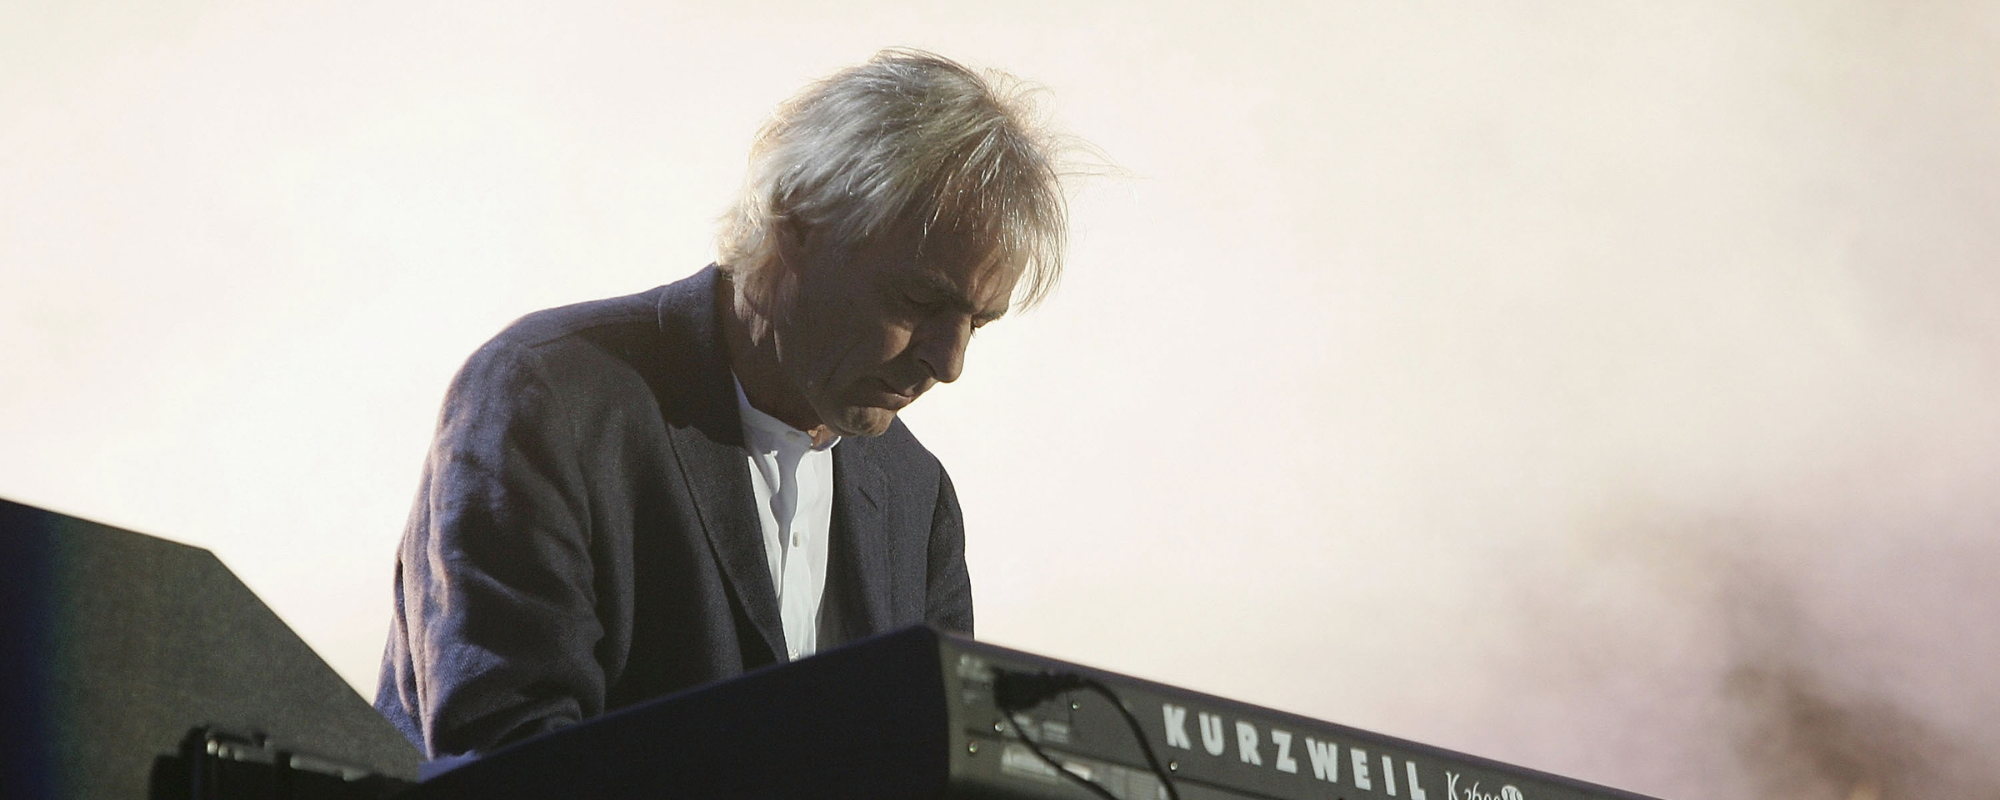 5 Songs You Didn’t Know Keyboardist Rick Wright Wrote for Pink Floyd